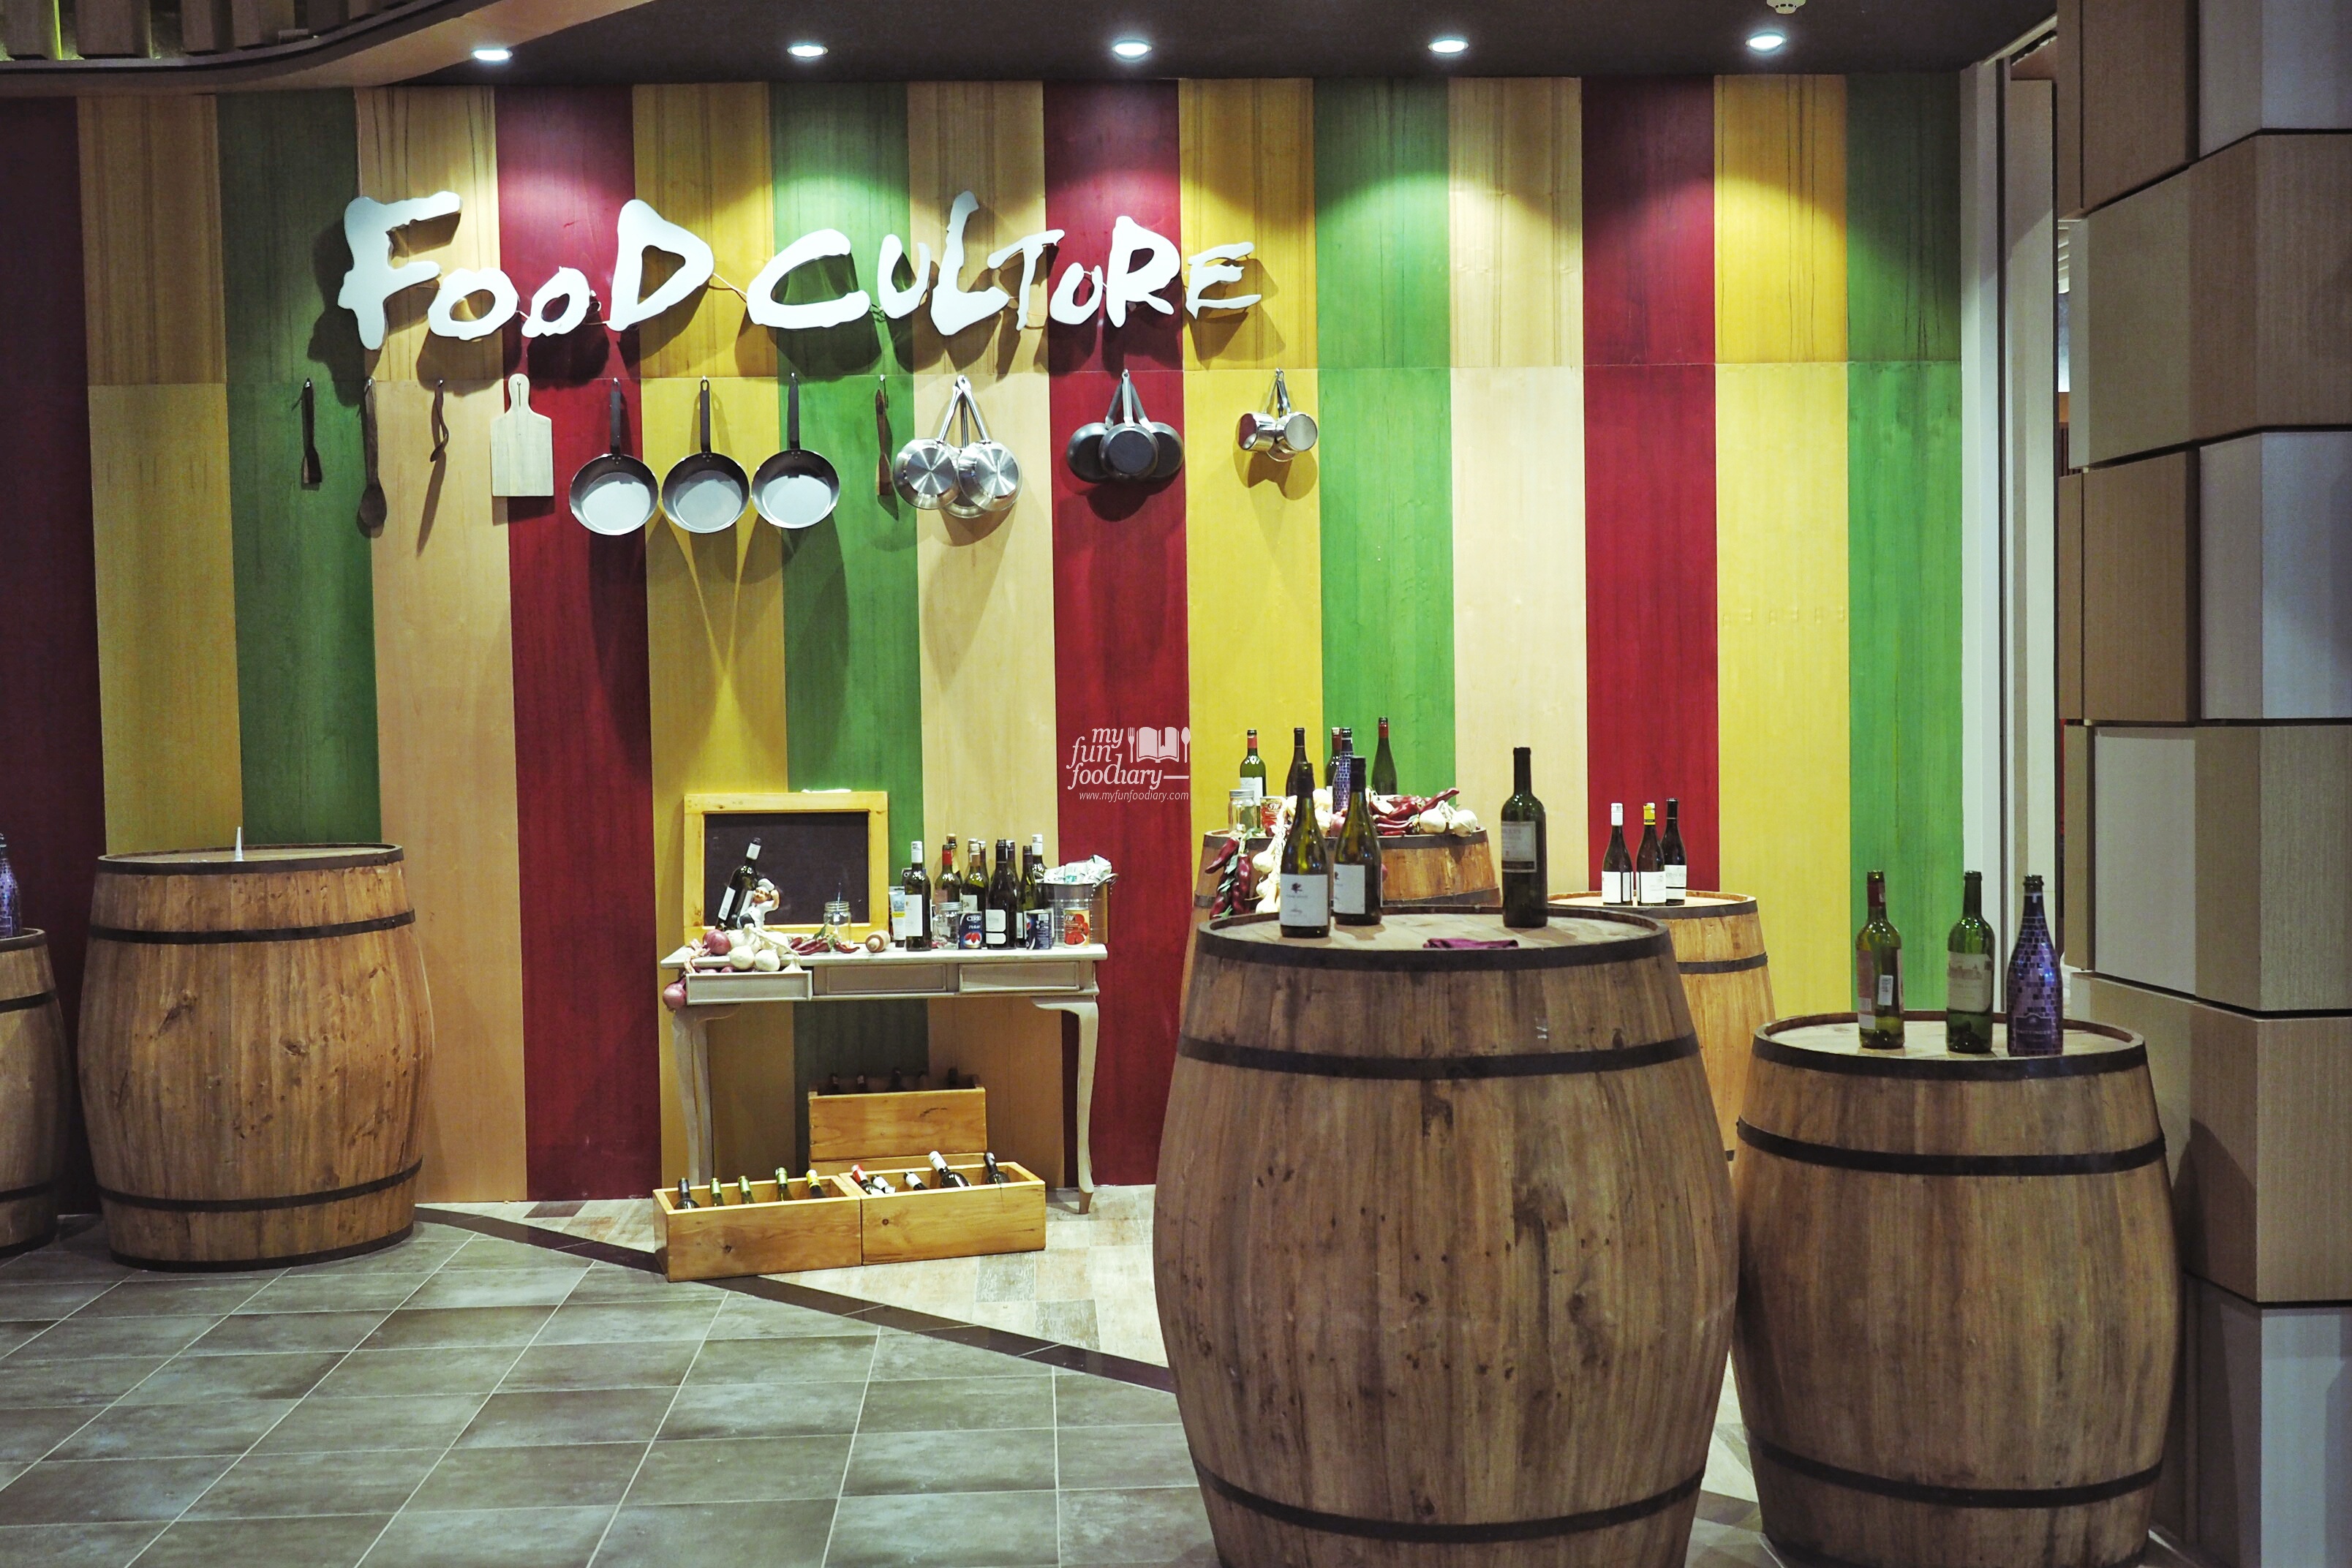 The Food Culture at AEON Mall by Myfunfoodiary